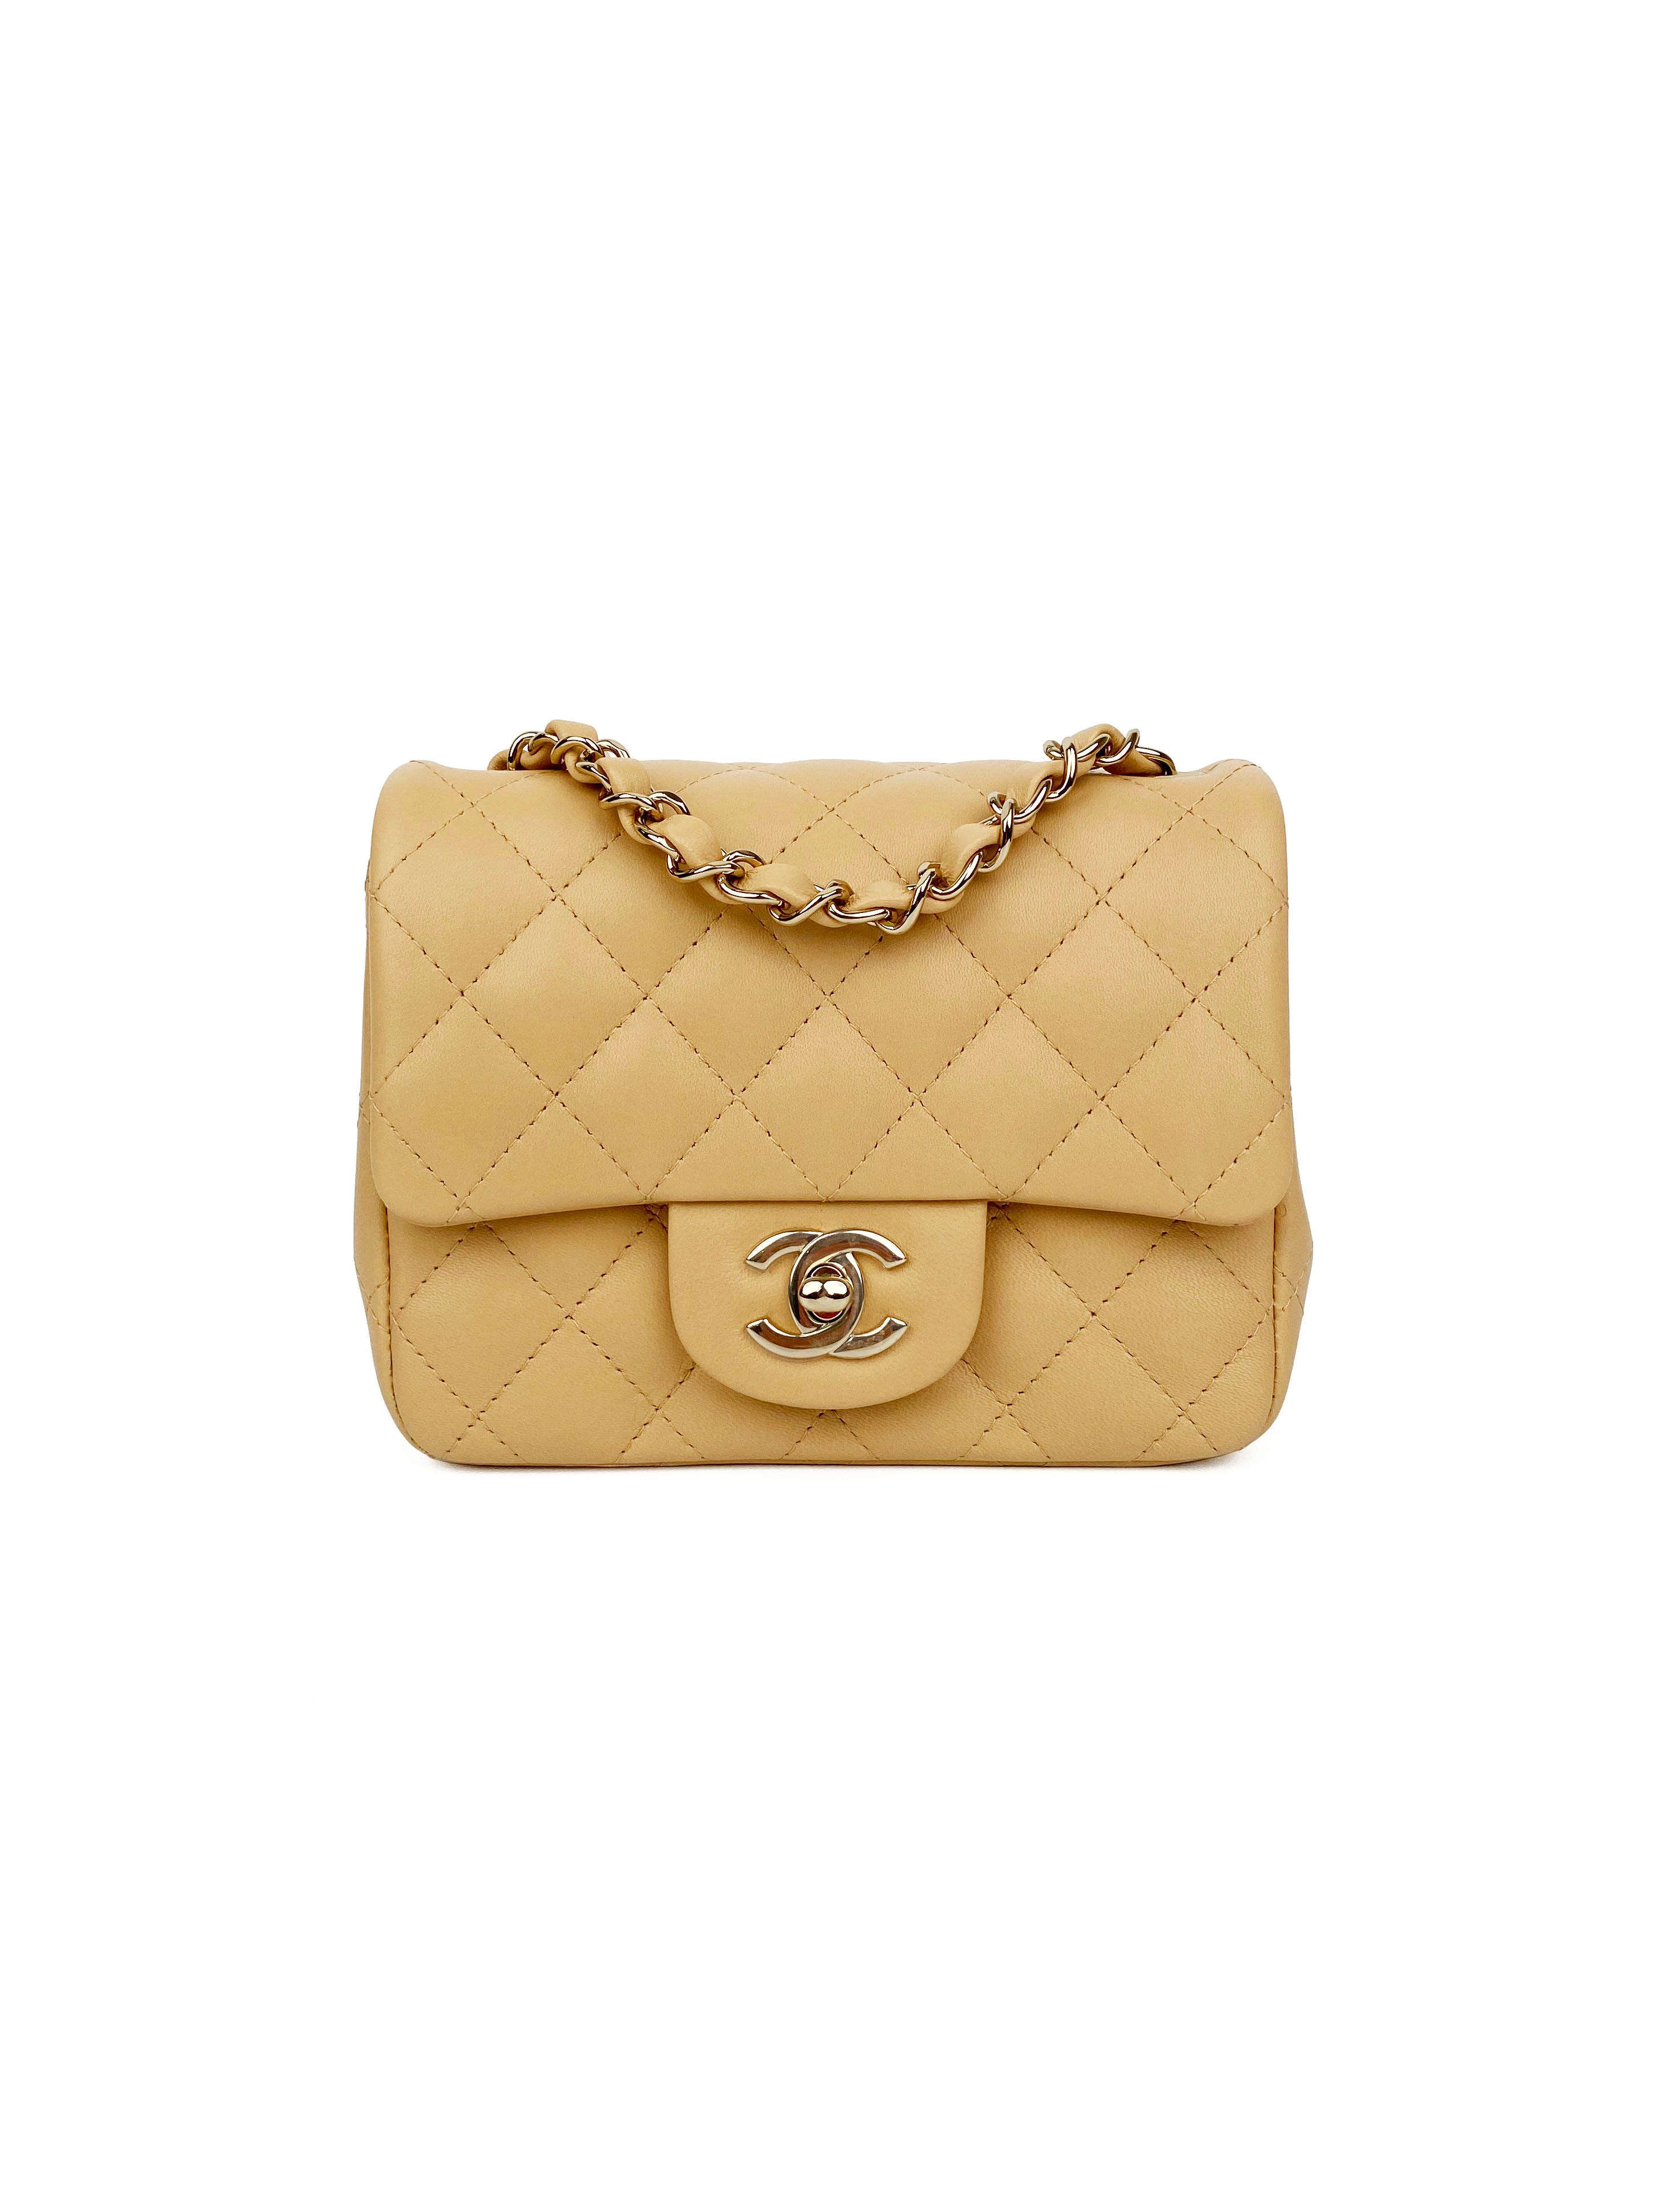 Chanel Small Square Nude Flap Bag